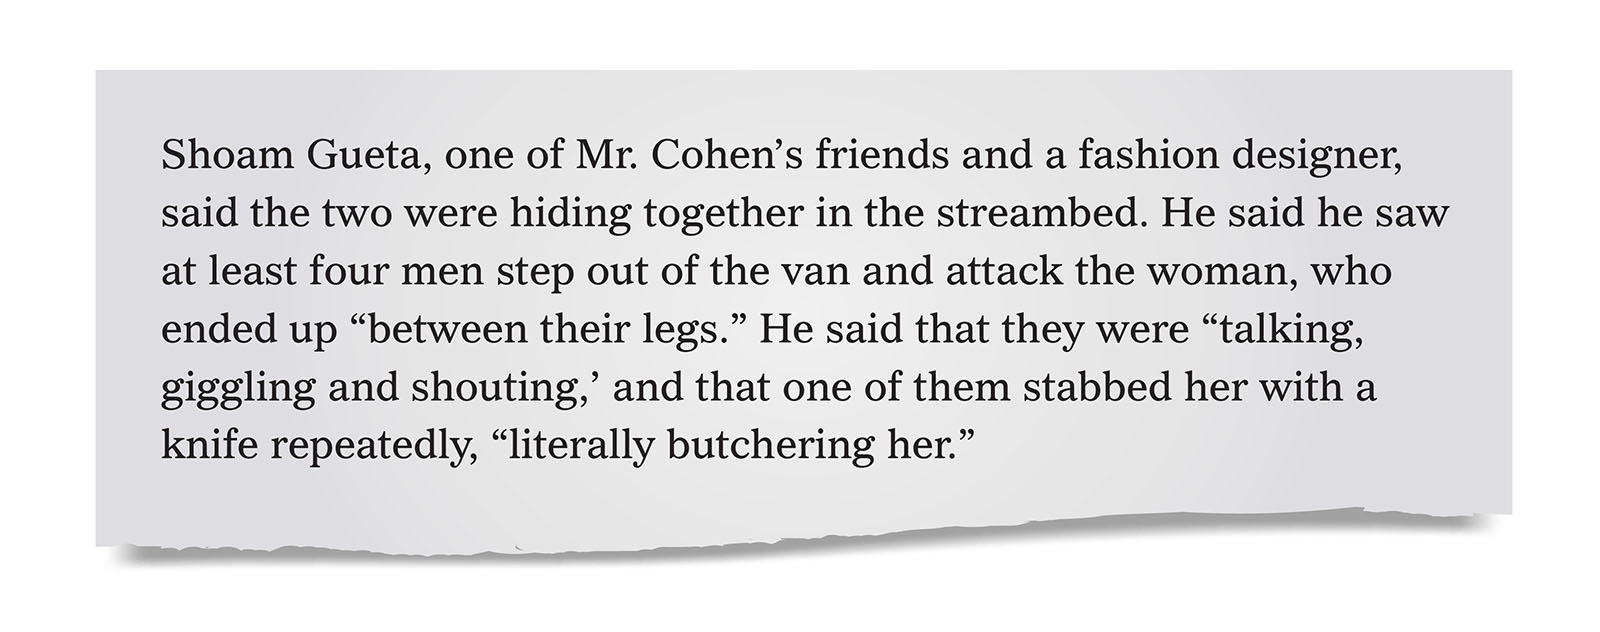 Pull quote:
Shoam Gueta, one of Mr. Cohen’s friends and a fashion designer, said the two were hiding together in the streambed. He said he saw at least four men step out of the van and attack the woman, who ended up “between their legs.” He said that they were “talking, giggling and shouting,’ and that one of them stabbed her with a knife repeatedly, “literally butchering her.”